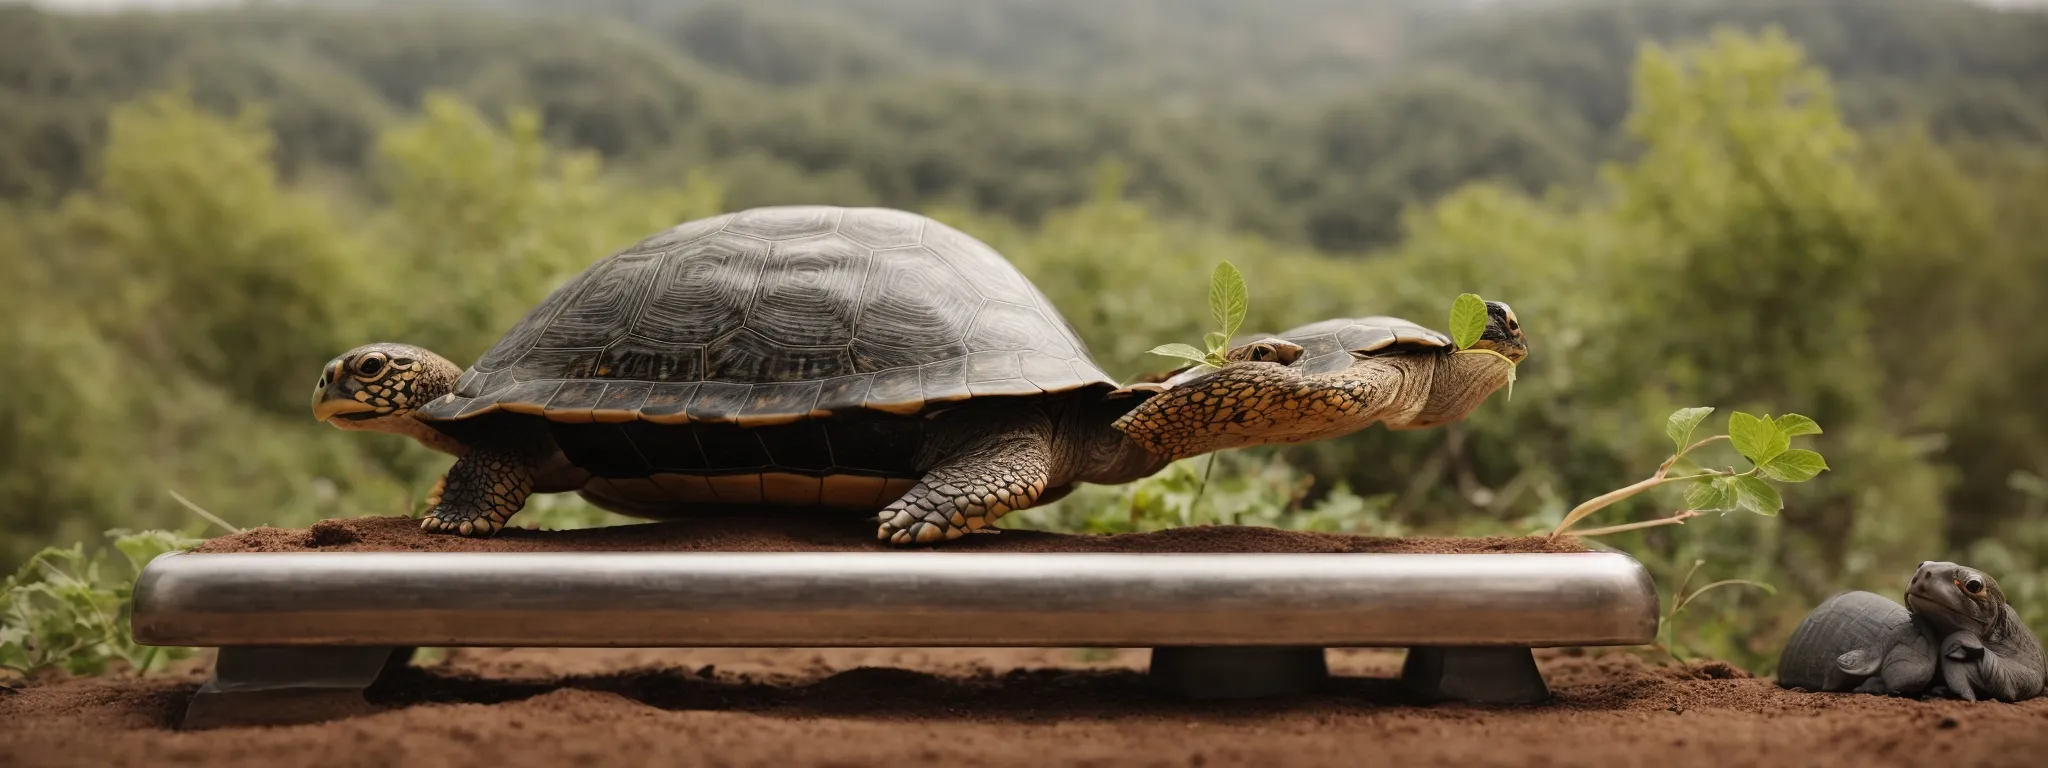 a balanced scale with a turtle representing seo on one side and a hare symbolizing paid ads on the other, illustrating the strategic decision between long-term growth and quick results.